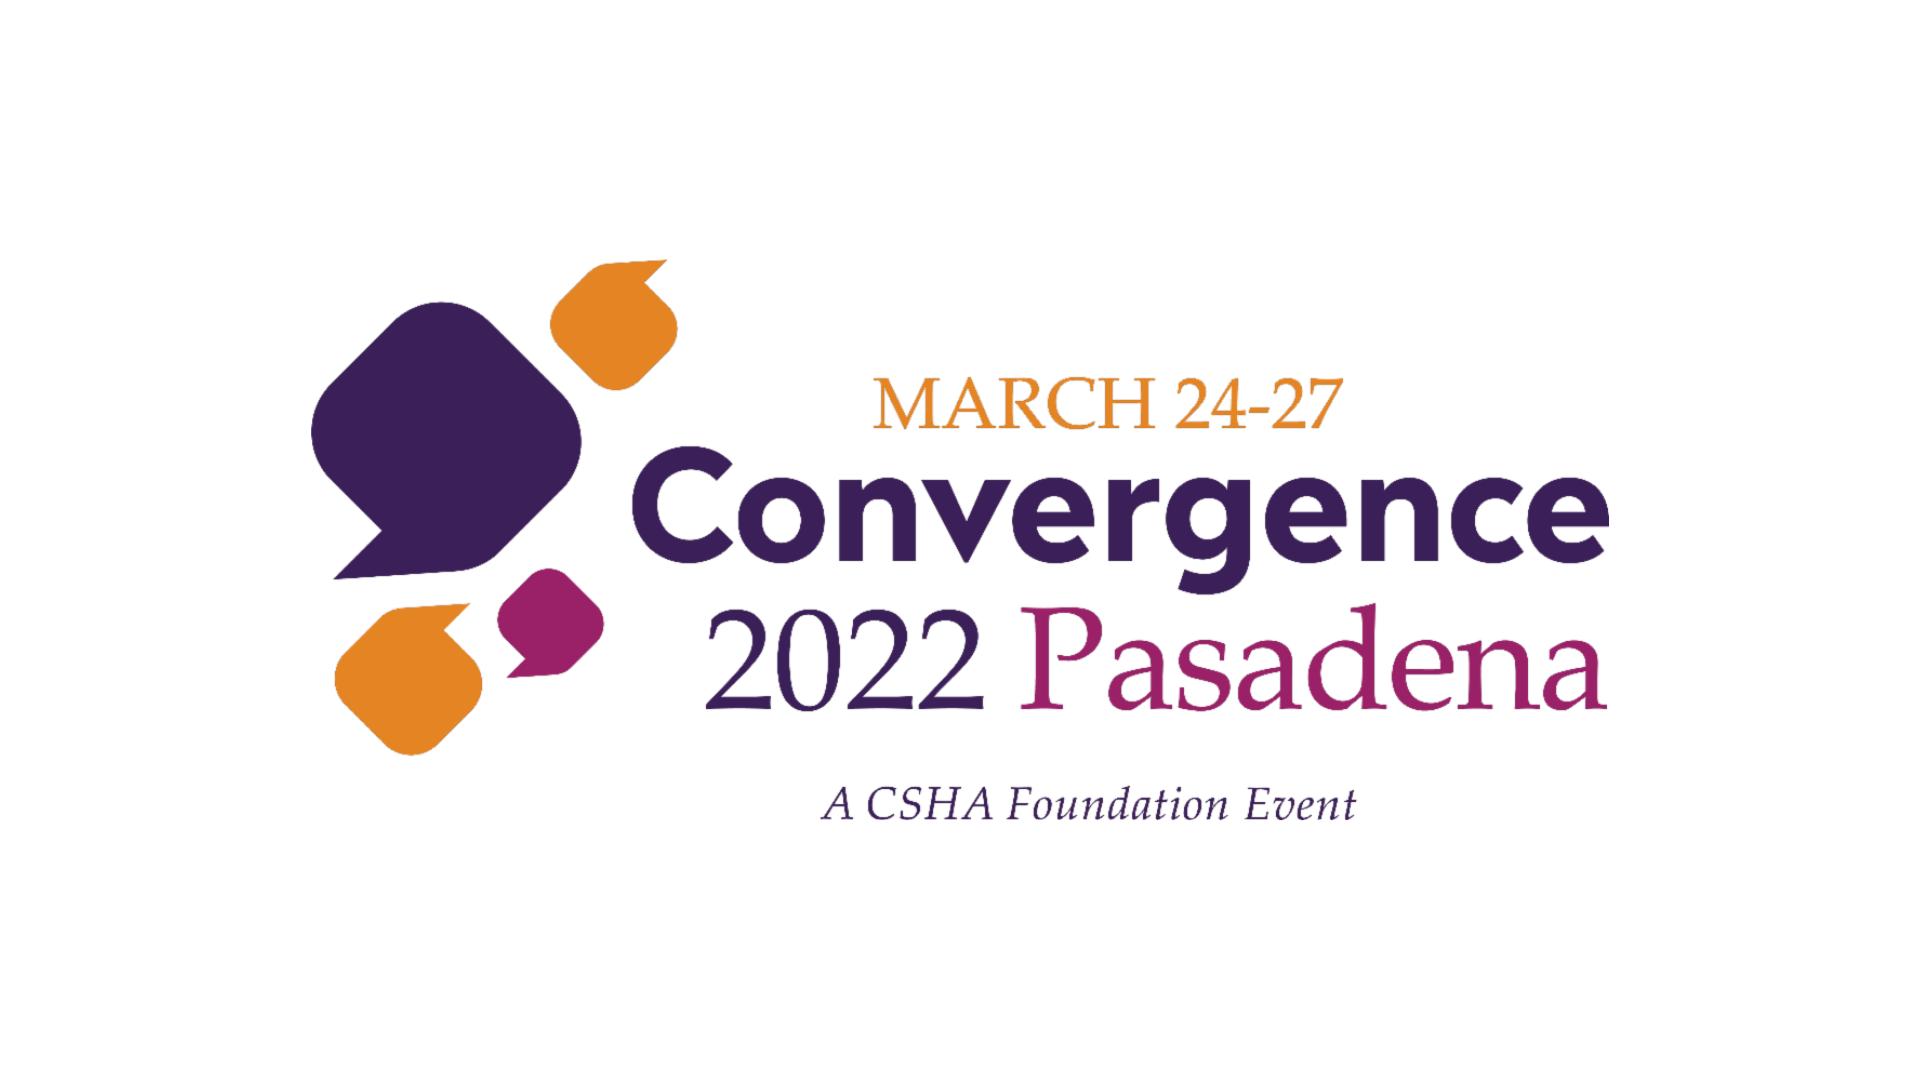 NEWS RELEASE: Convergence 2022 in Pasadena to honor state’s SLP, AuD consumers